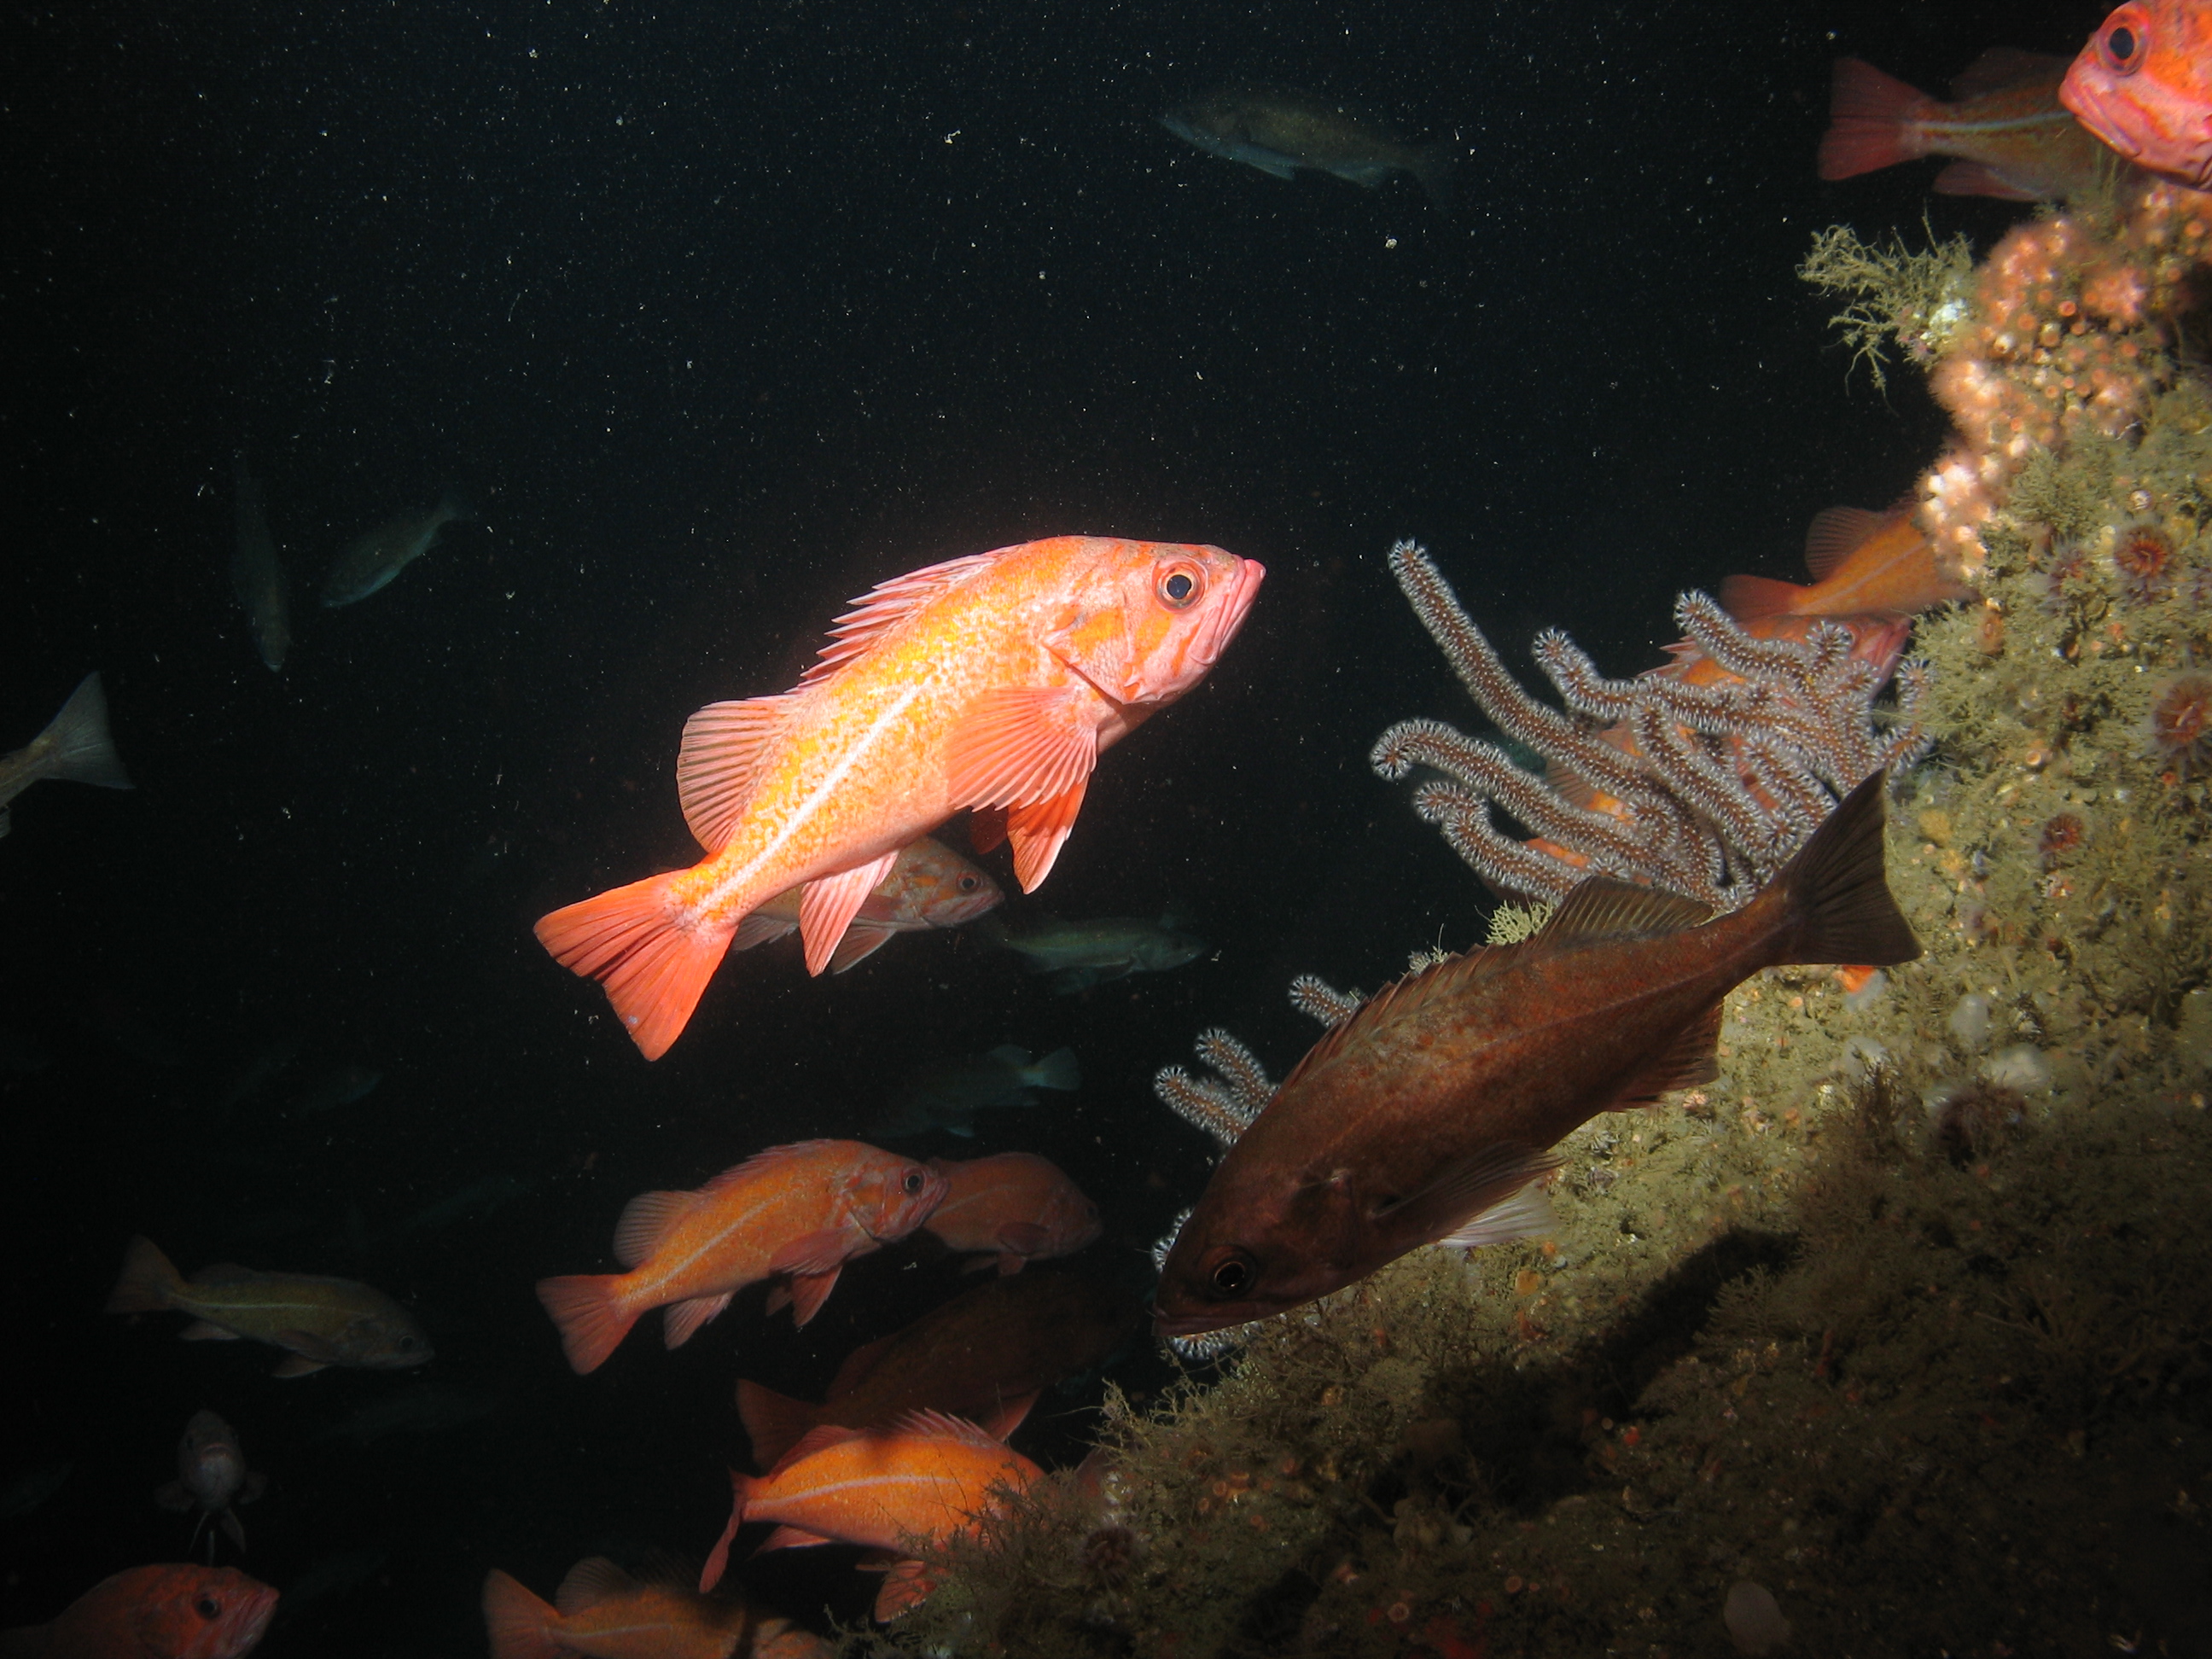 A school of red-orange fish swim around a dark brown coral among rocks on the seafloor. Credit: Marine Applied Research and Exploration, NOAA